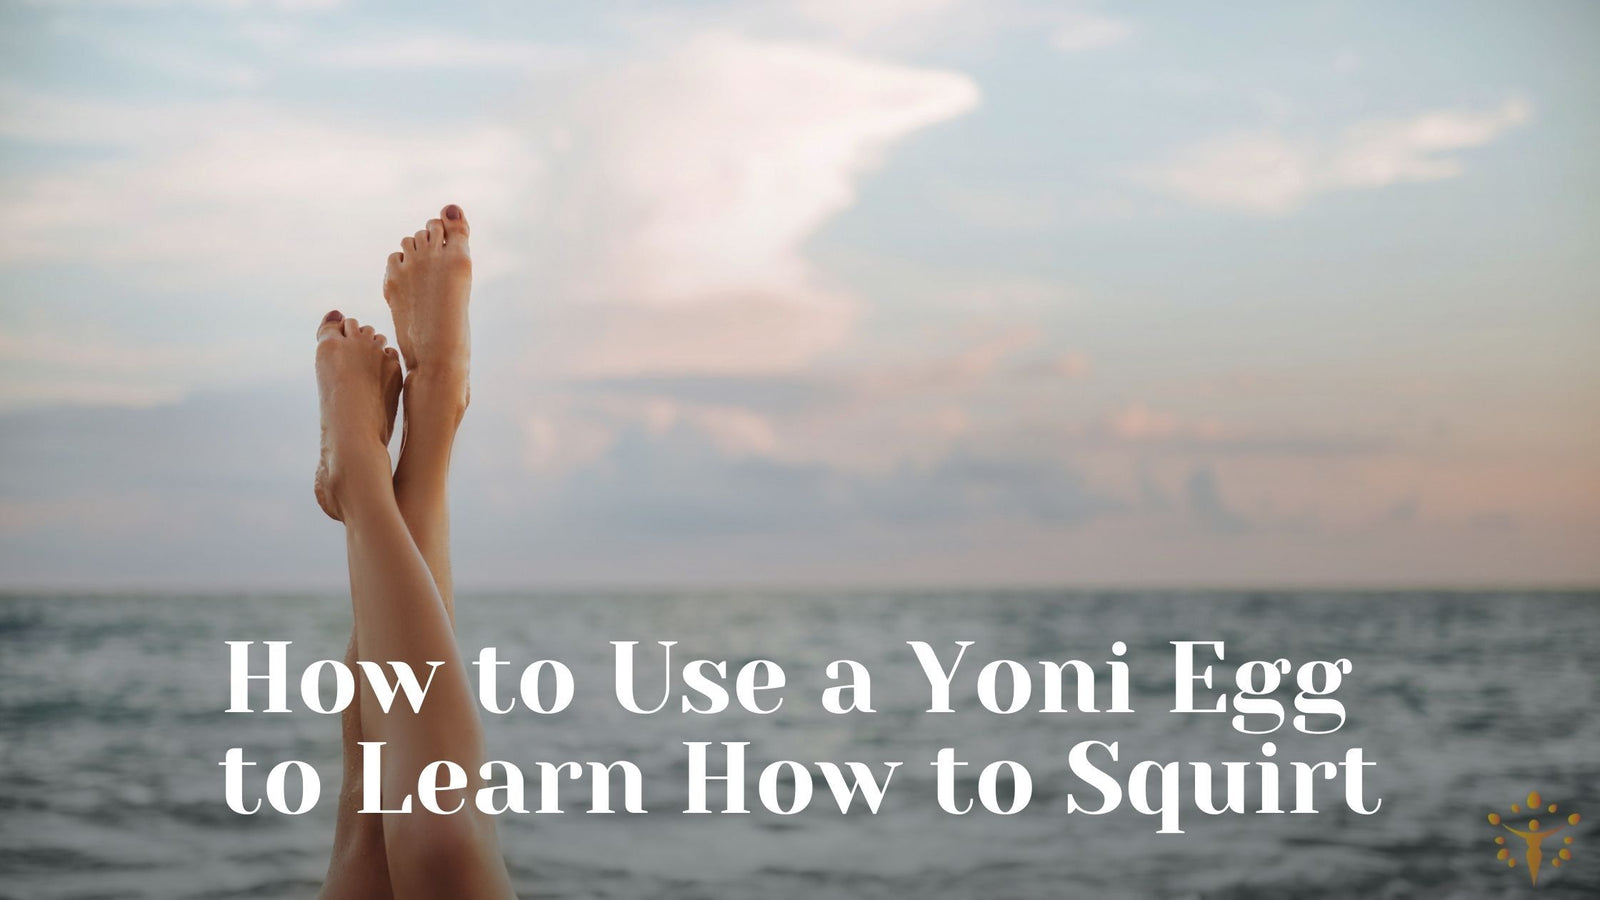 cody hepler recommends how to learn to squirt pic